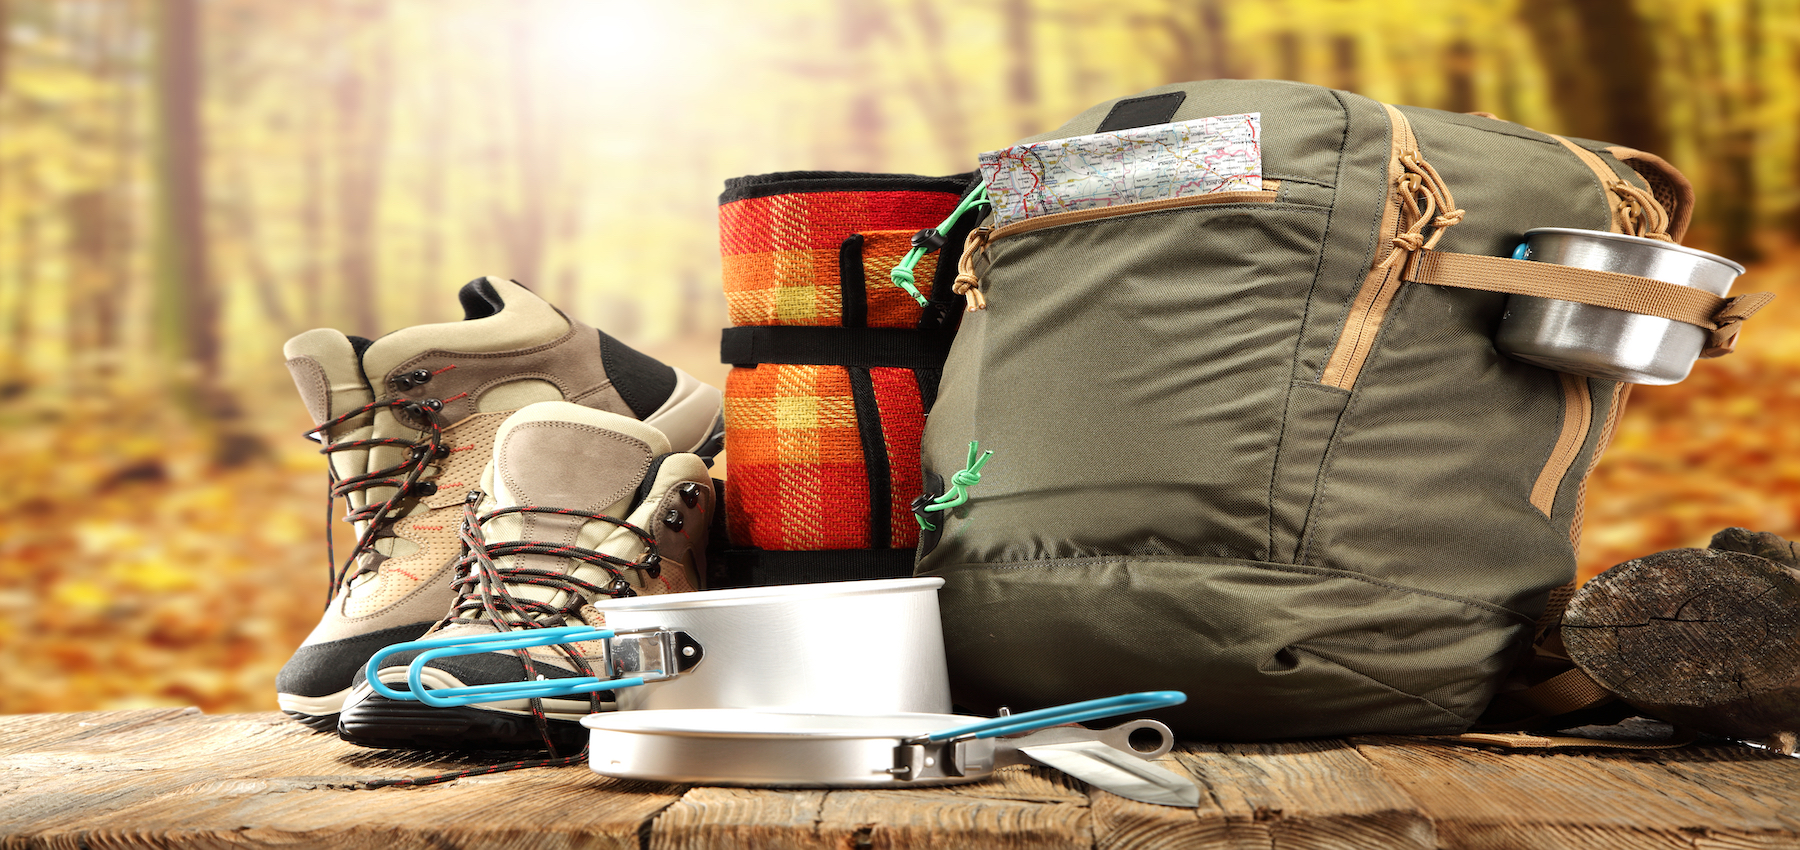 12 Essentials To Bring With When Camping